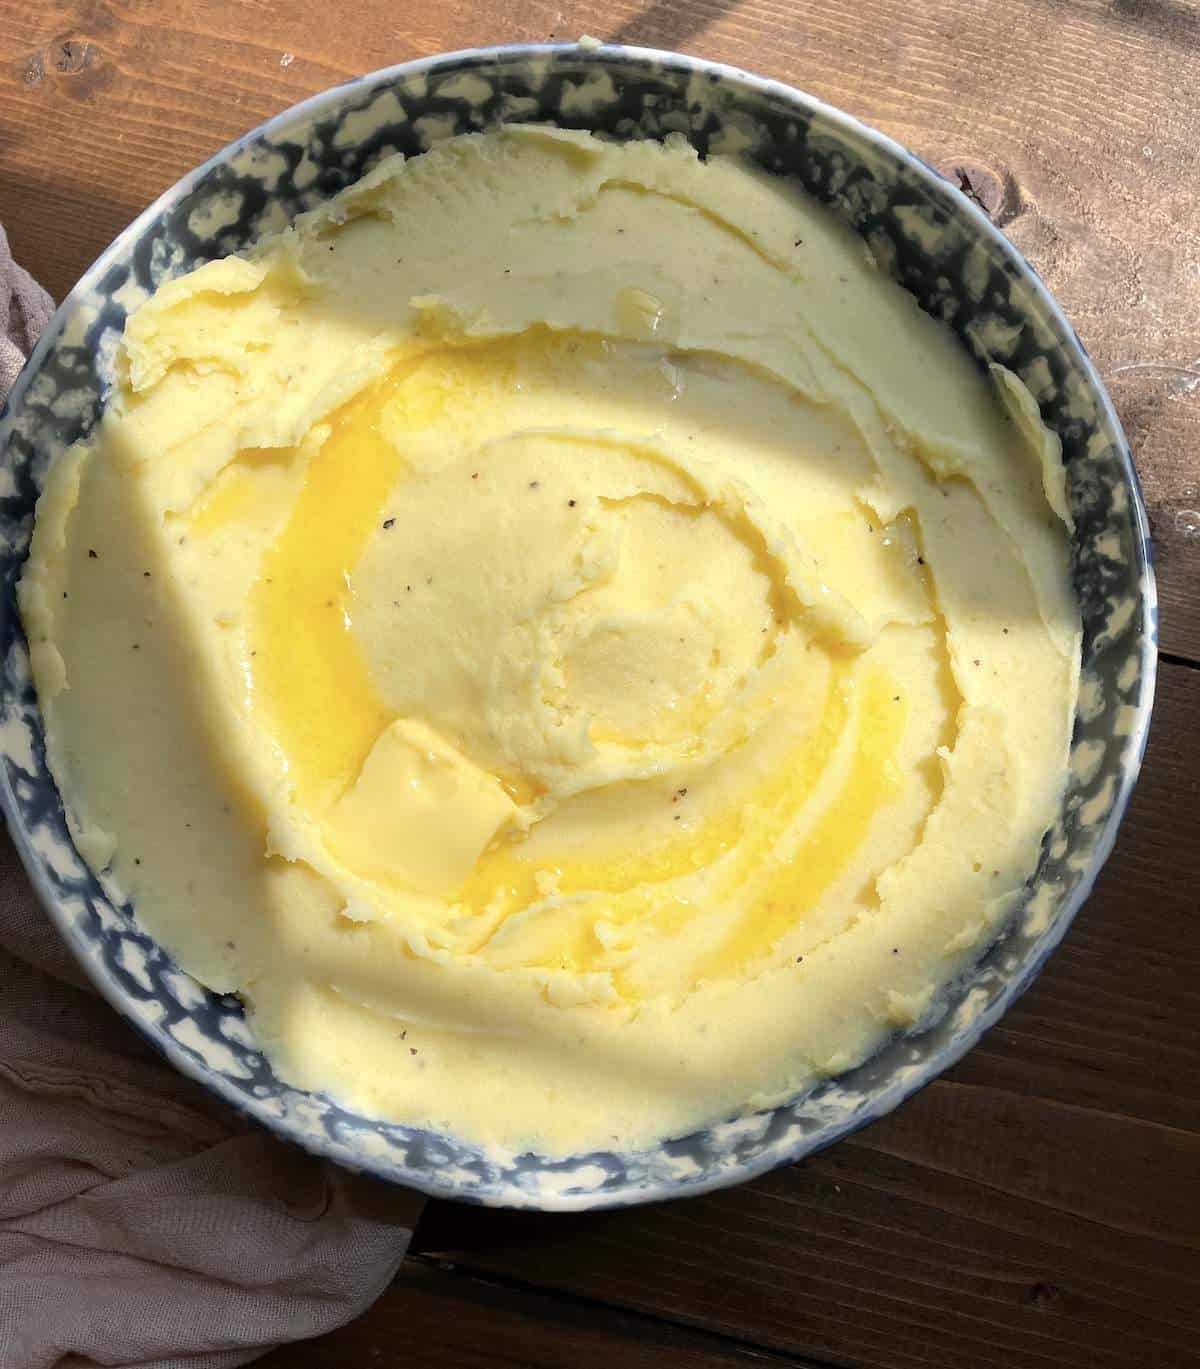 A bowl of buttermilk mashed potatoes in the afternoon sunlight with melted butter on top.